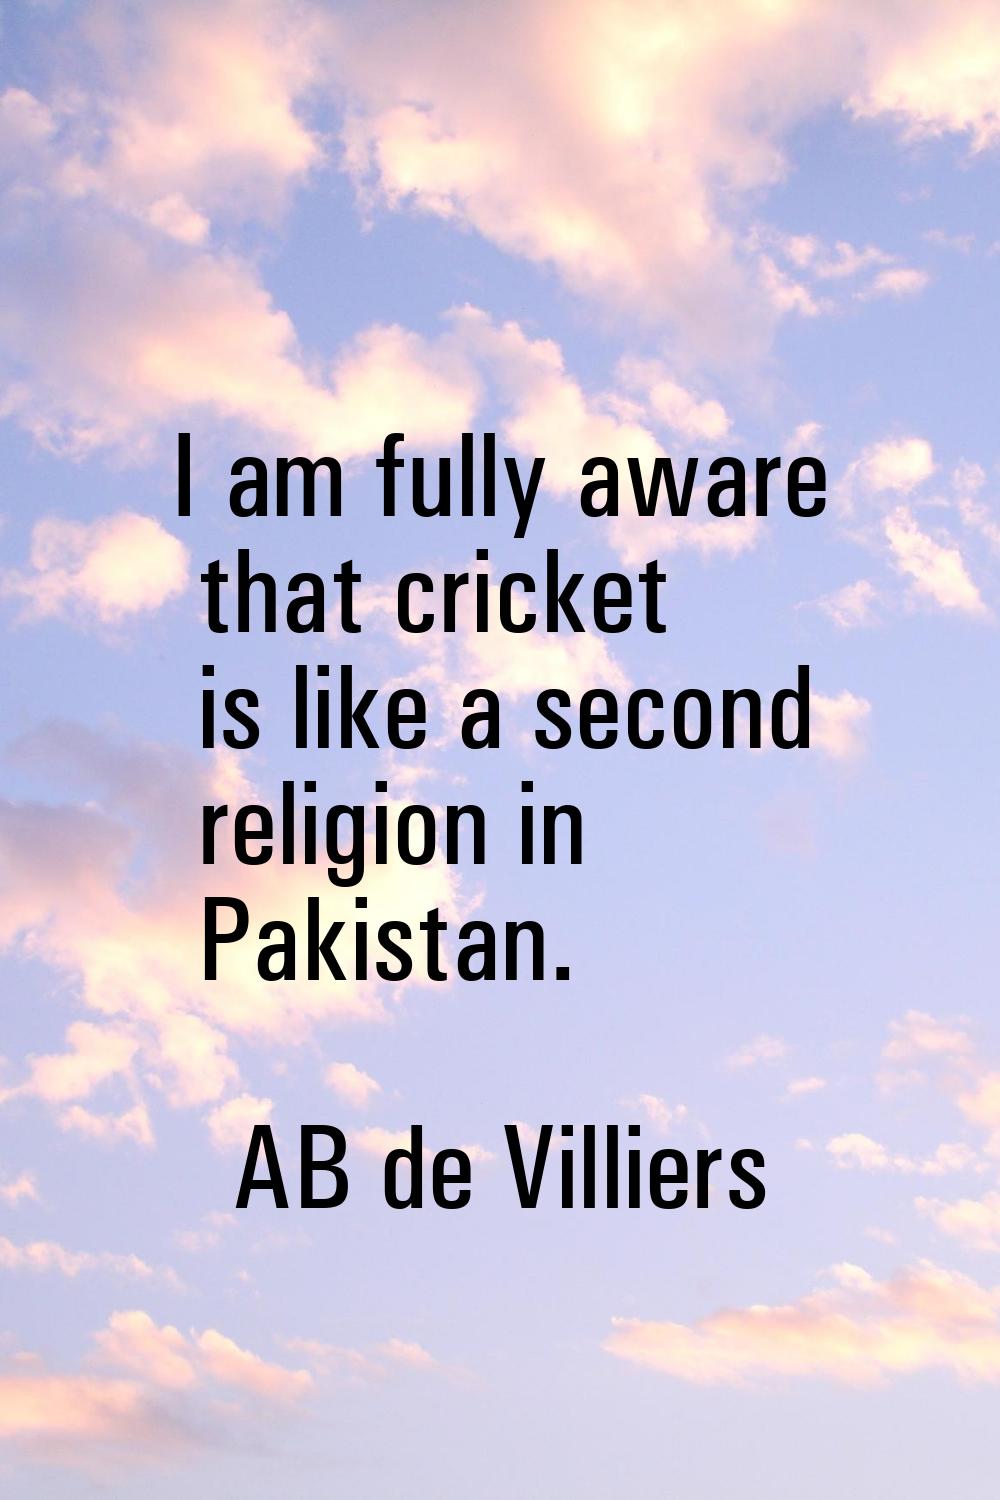 I am fully aware that cricket is like a second religion in Pakistan.